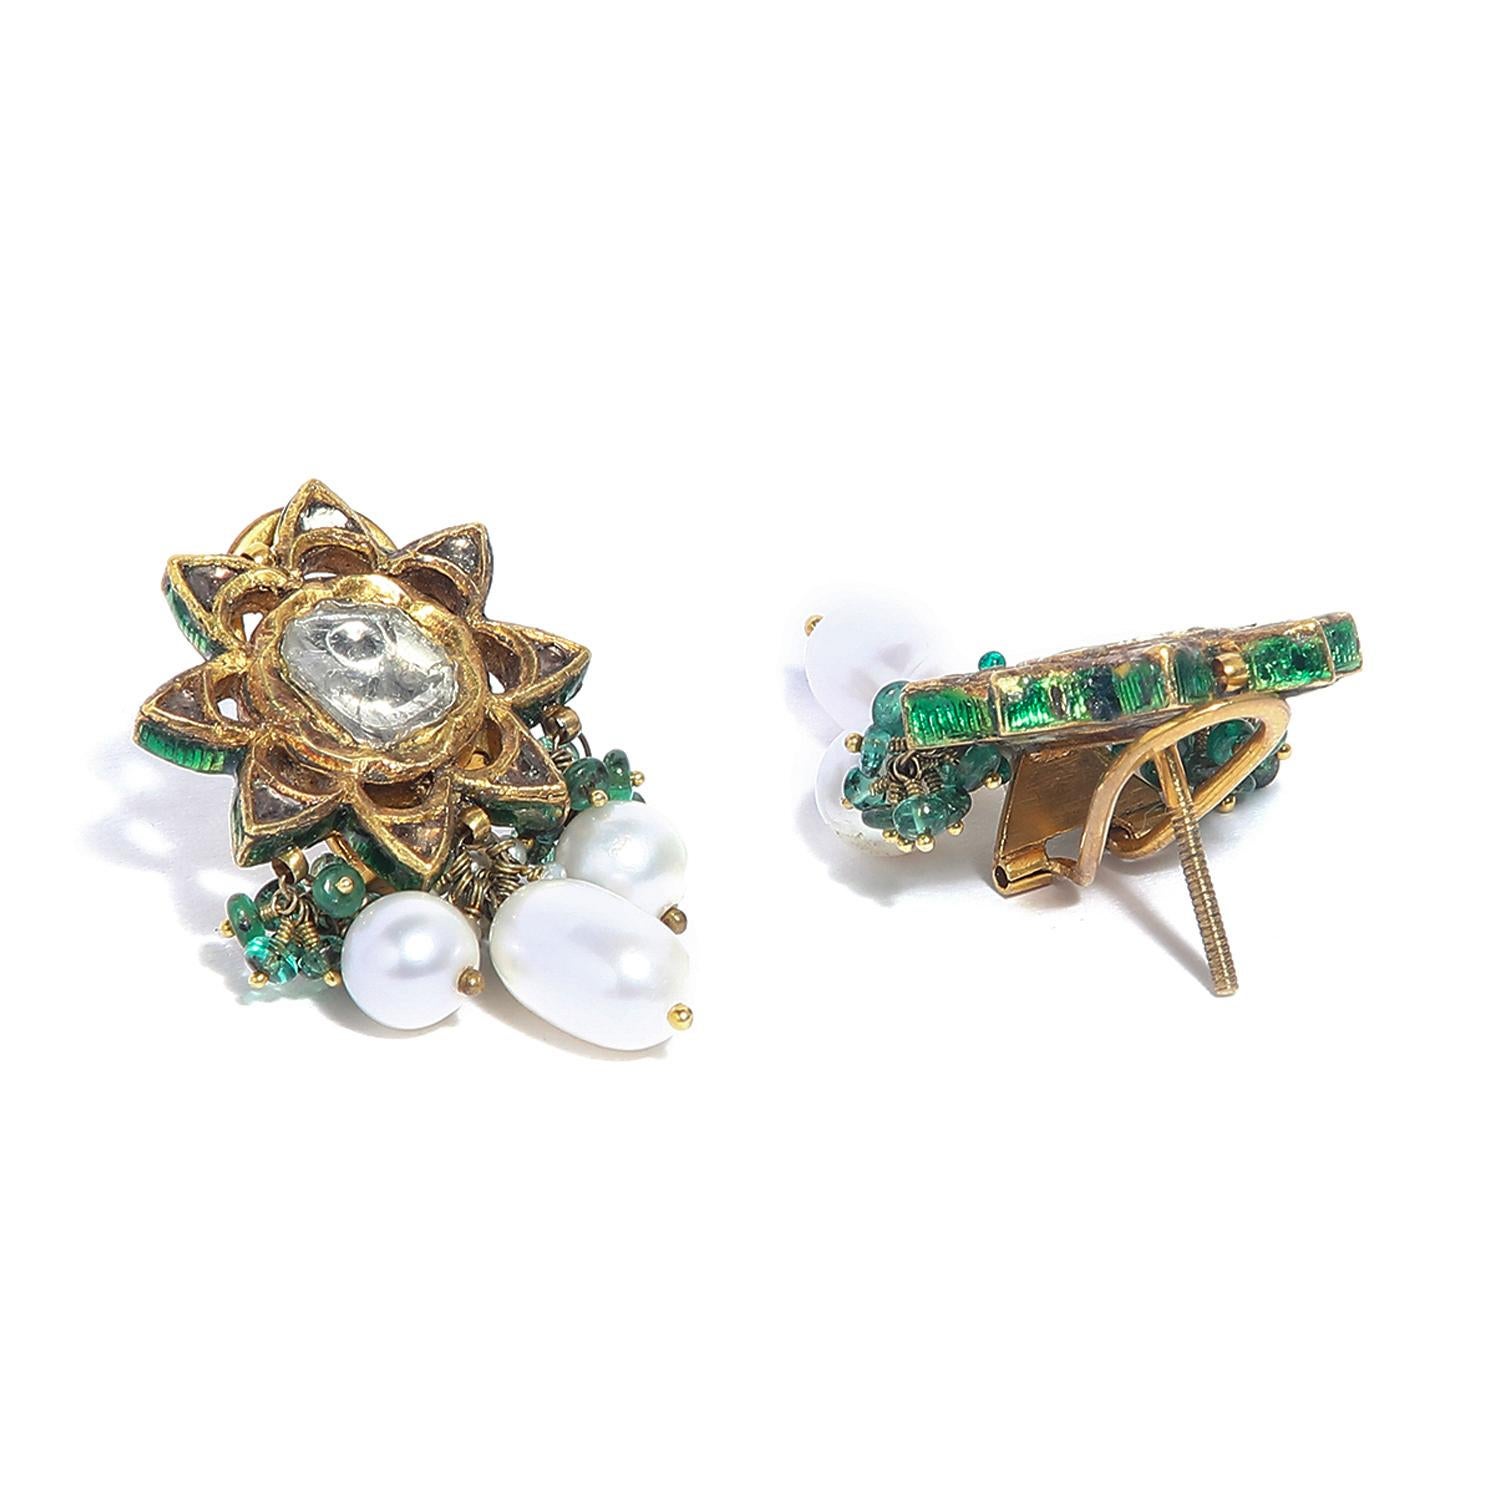 Ball Cut Gold Polki Emerald Earrings with Pearls - Vintage Intention For Sale